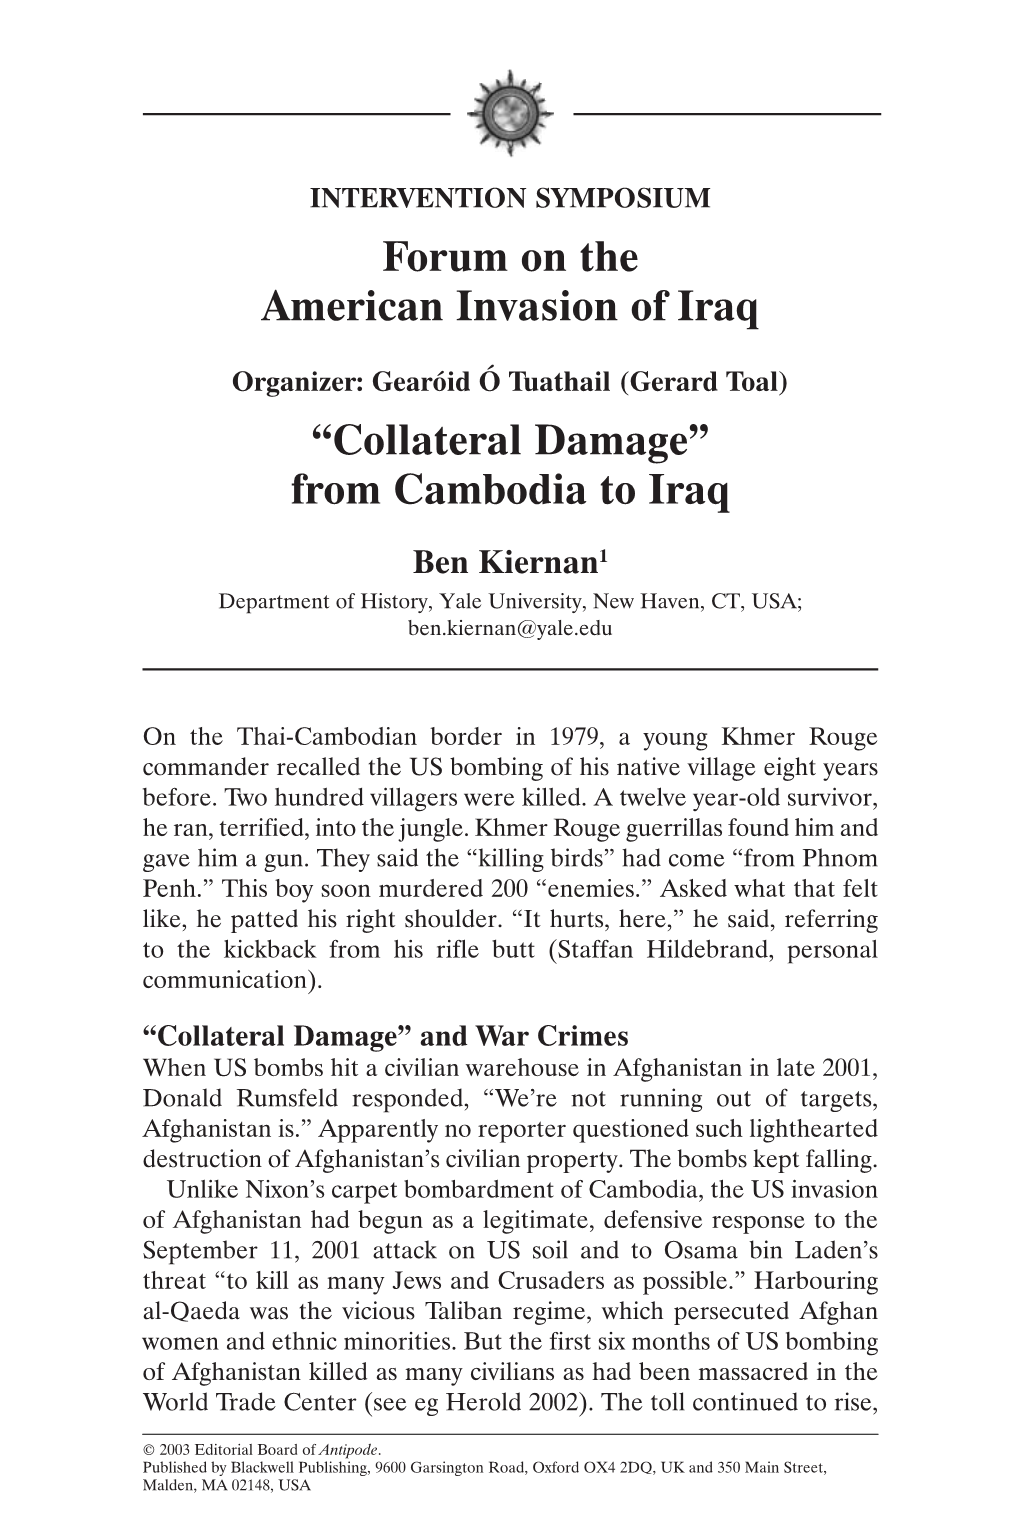 Collateral Damage” from Cambodia to Iraq